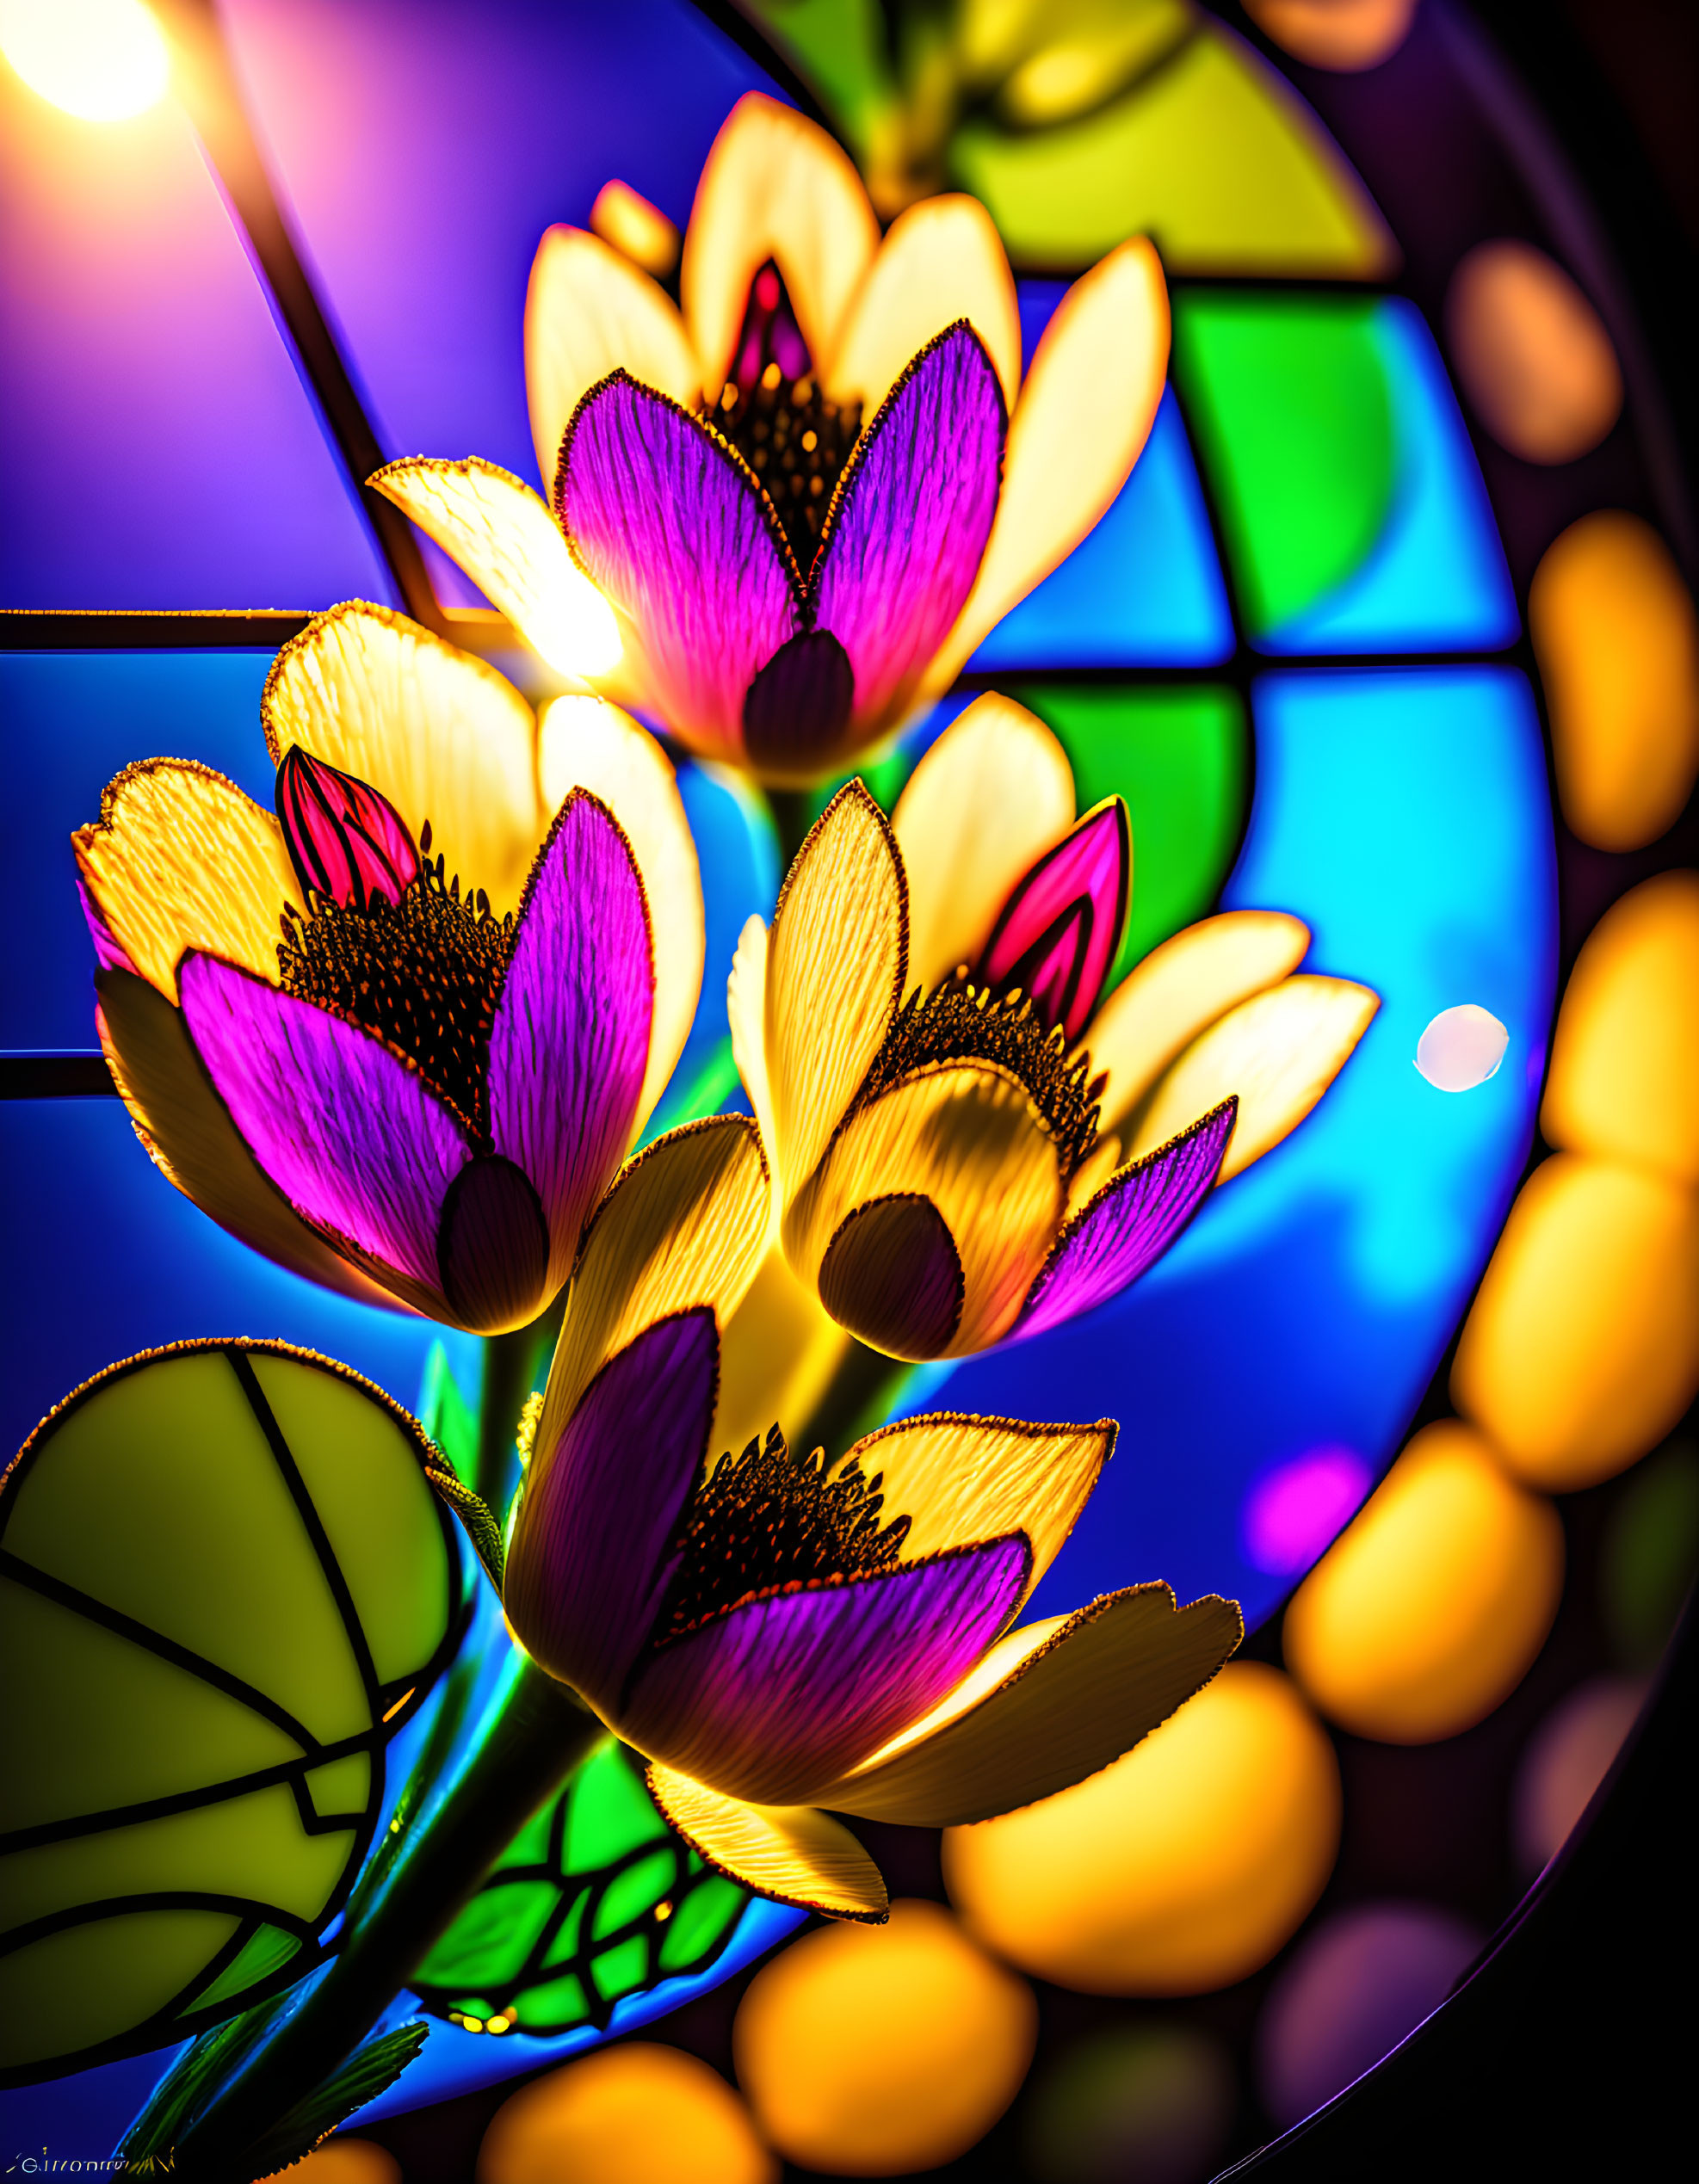 Stained glass flowers